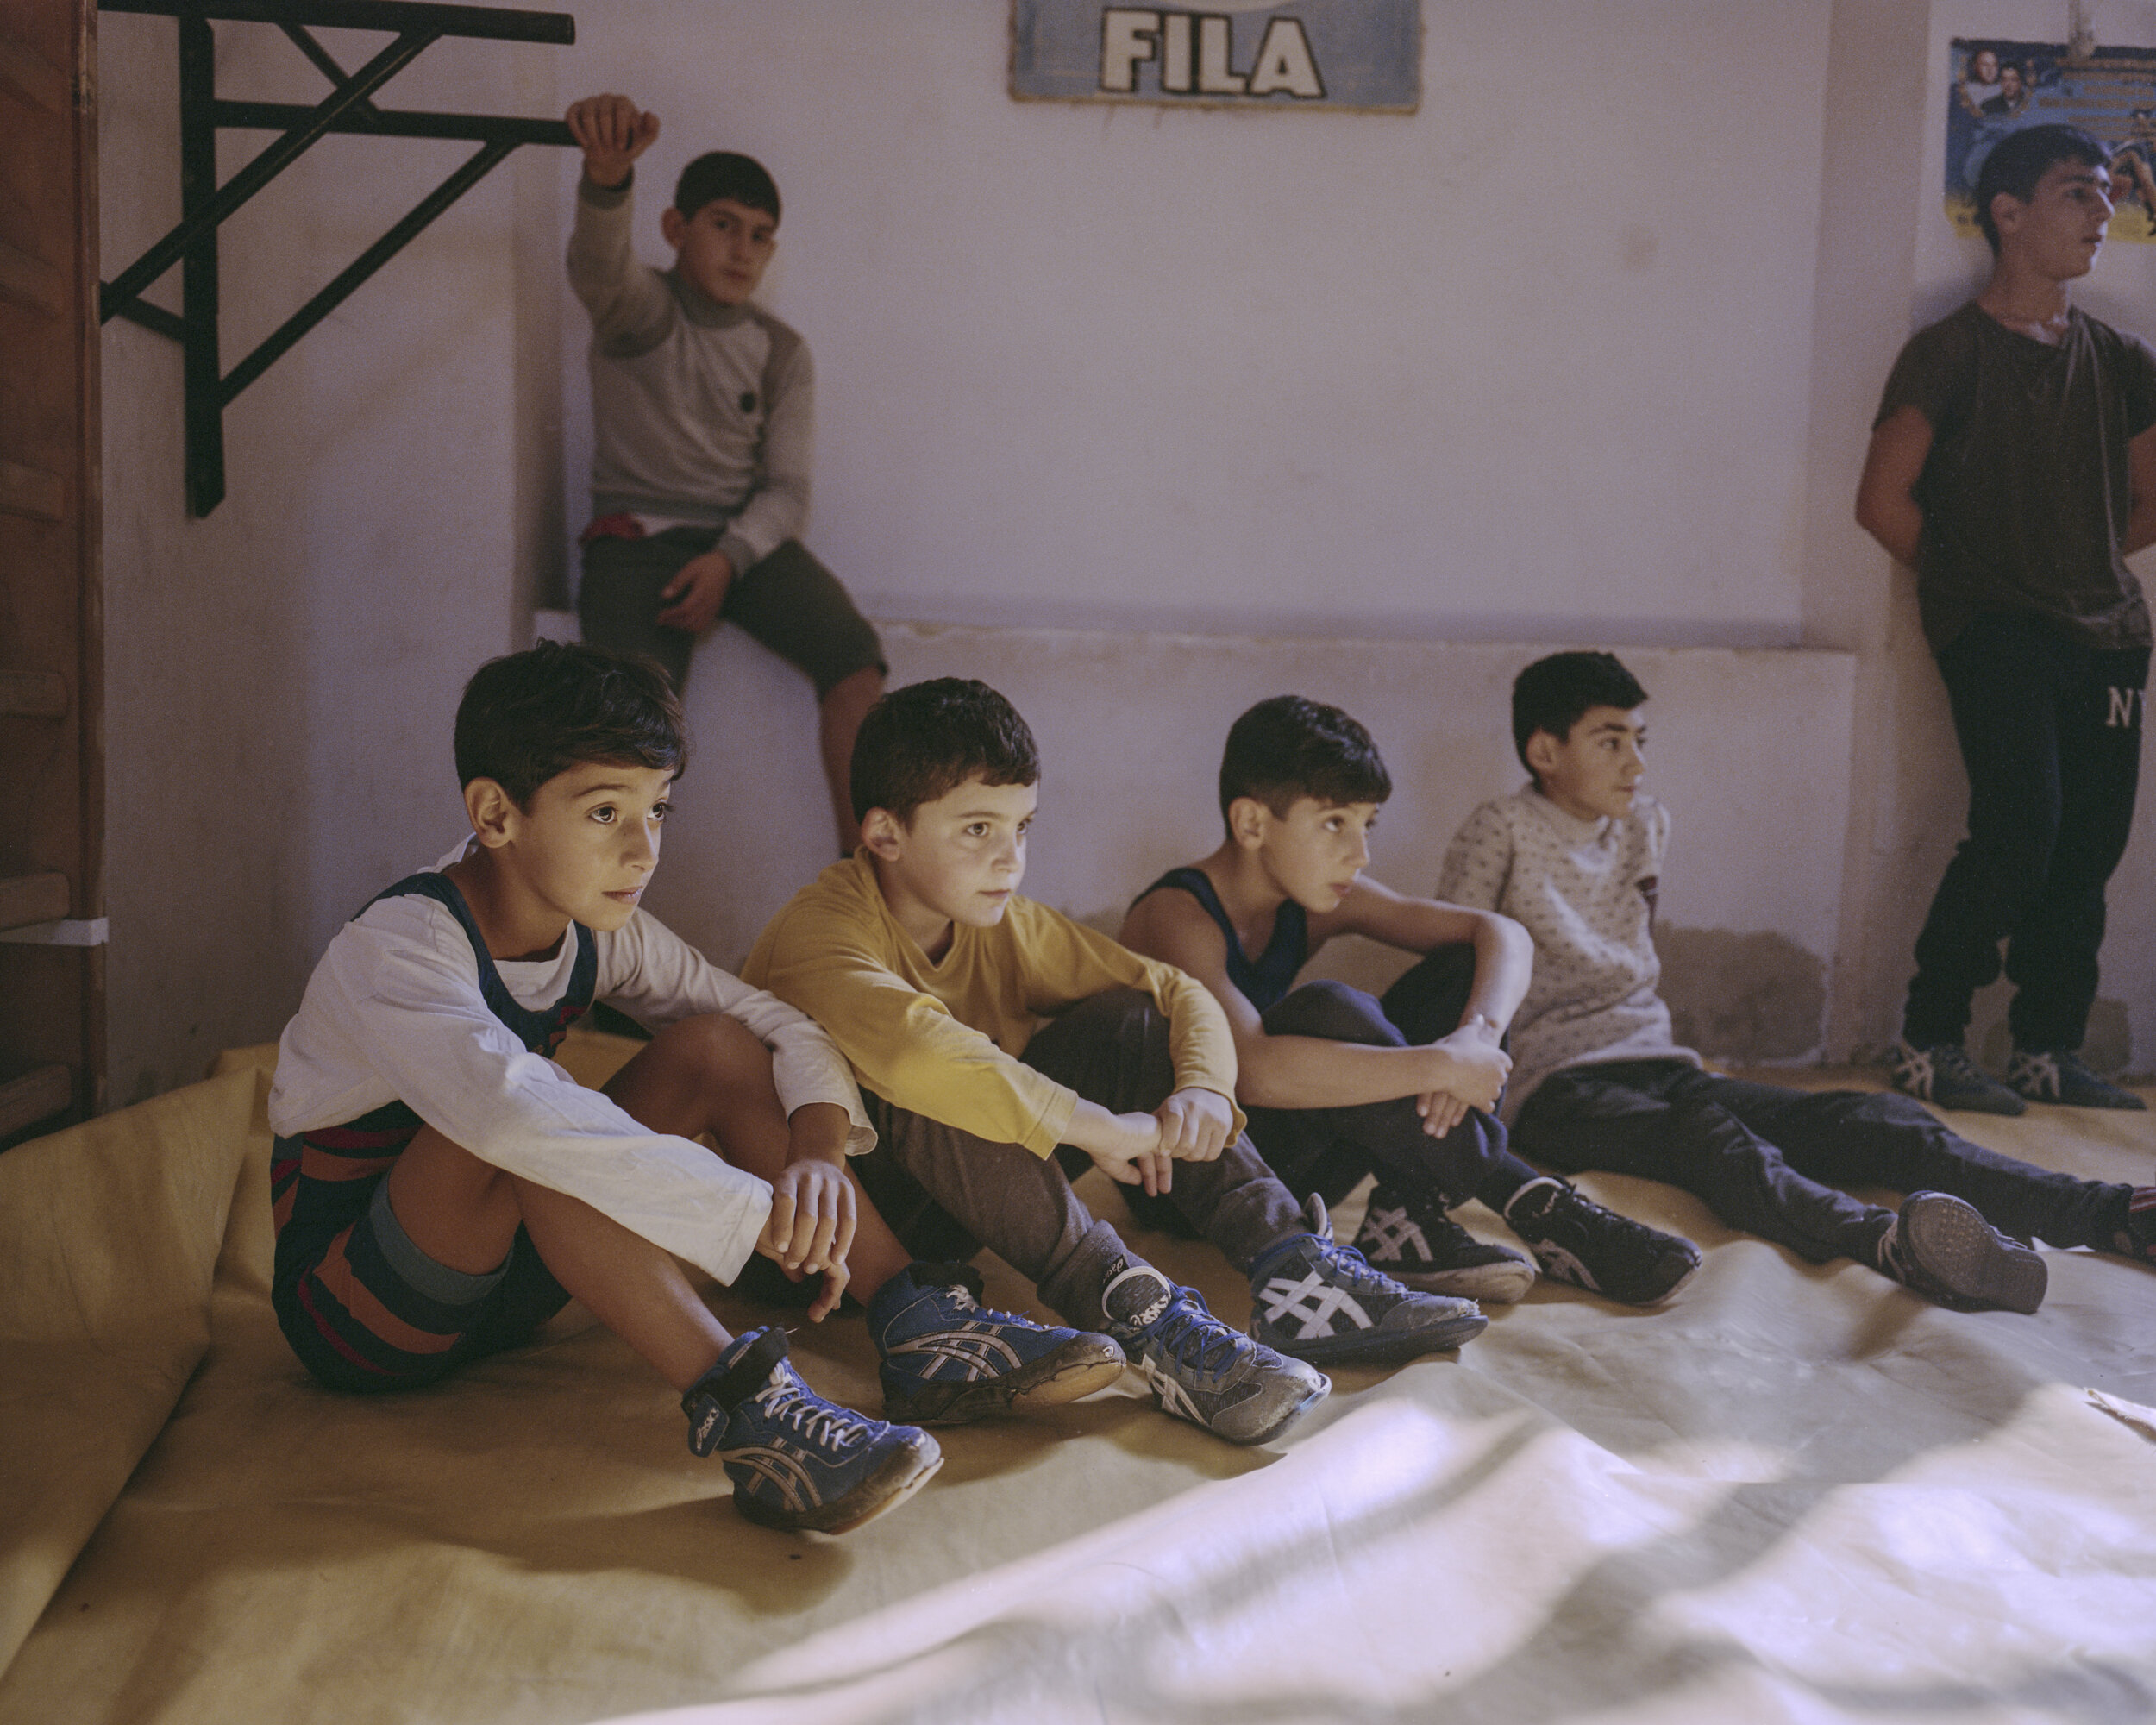  This project follows the importance of sports in Armenian Youth culture, although also approaches themes like Manhood and the place of Man in Armenian society. Since the 2018 Velvet Revolution, sports has become a major source of representing strong